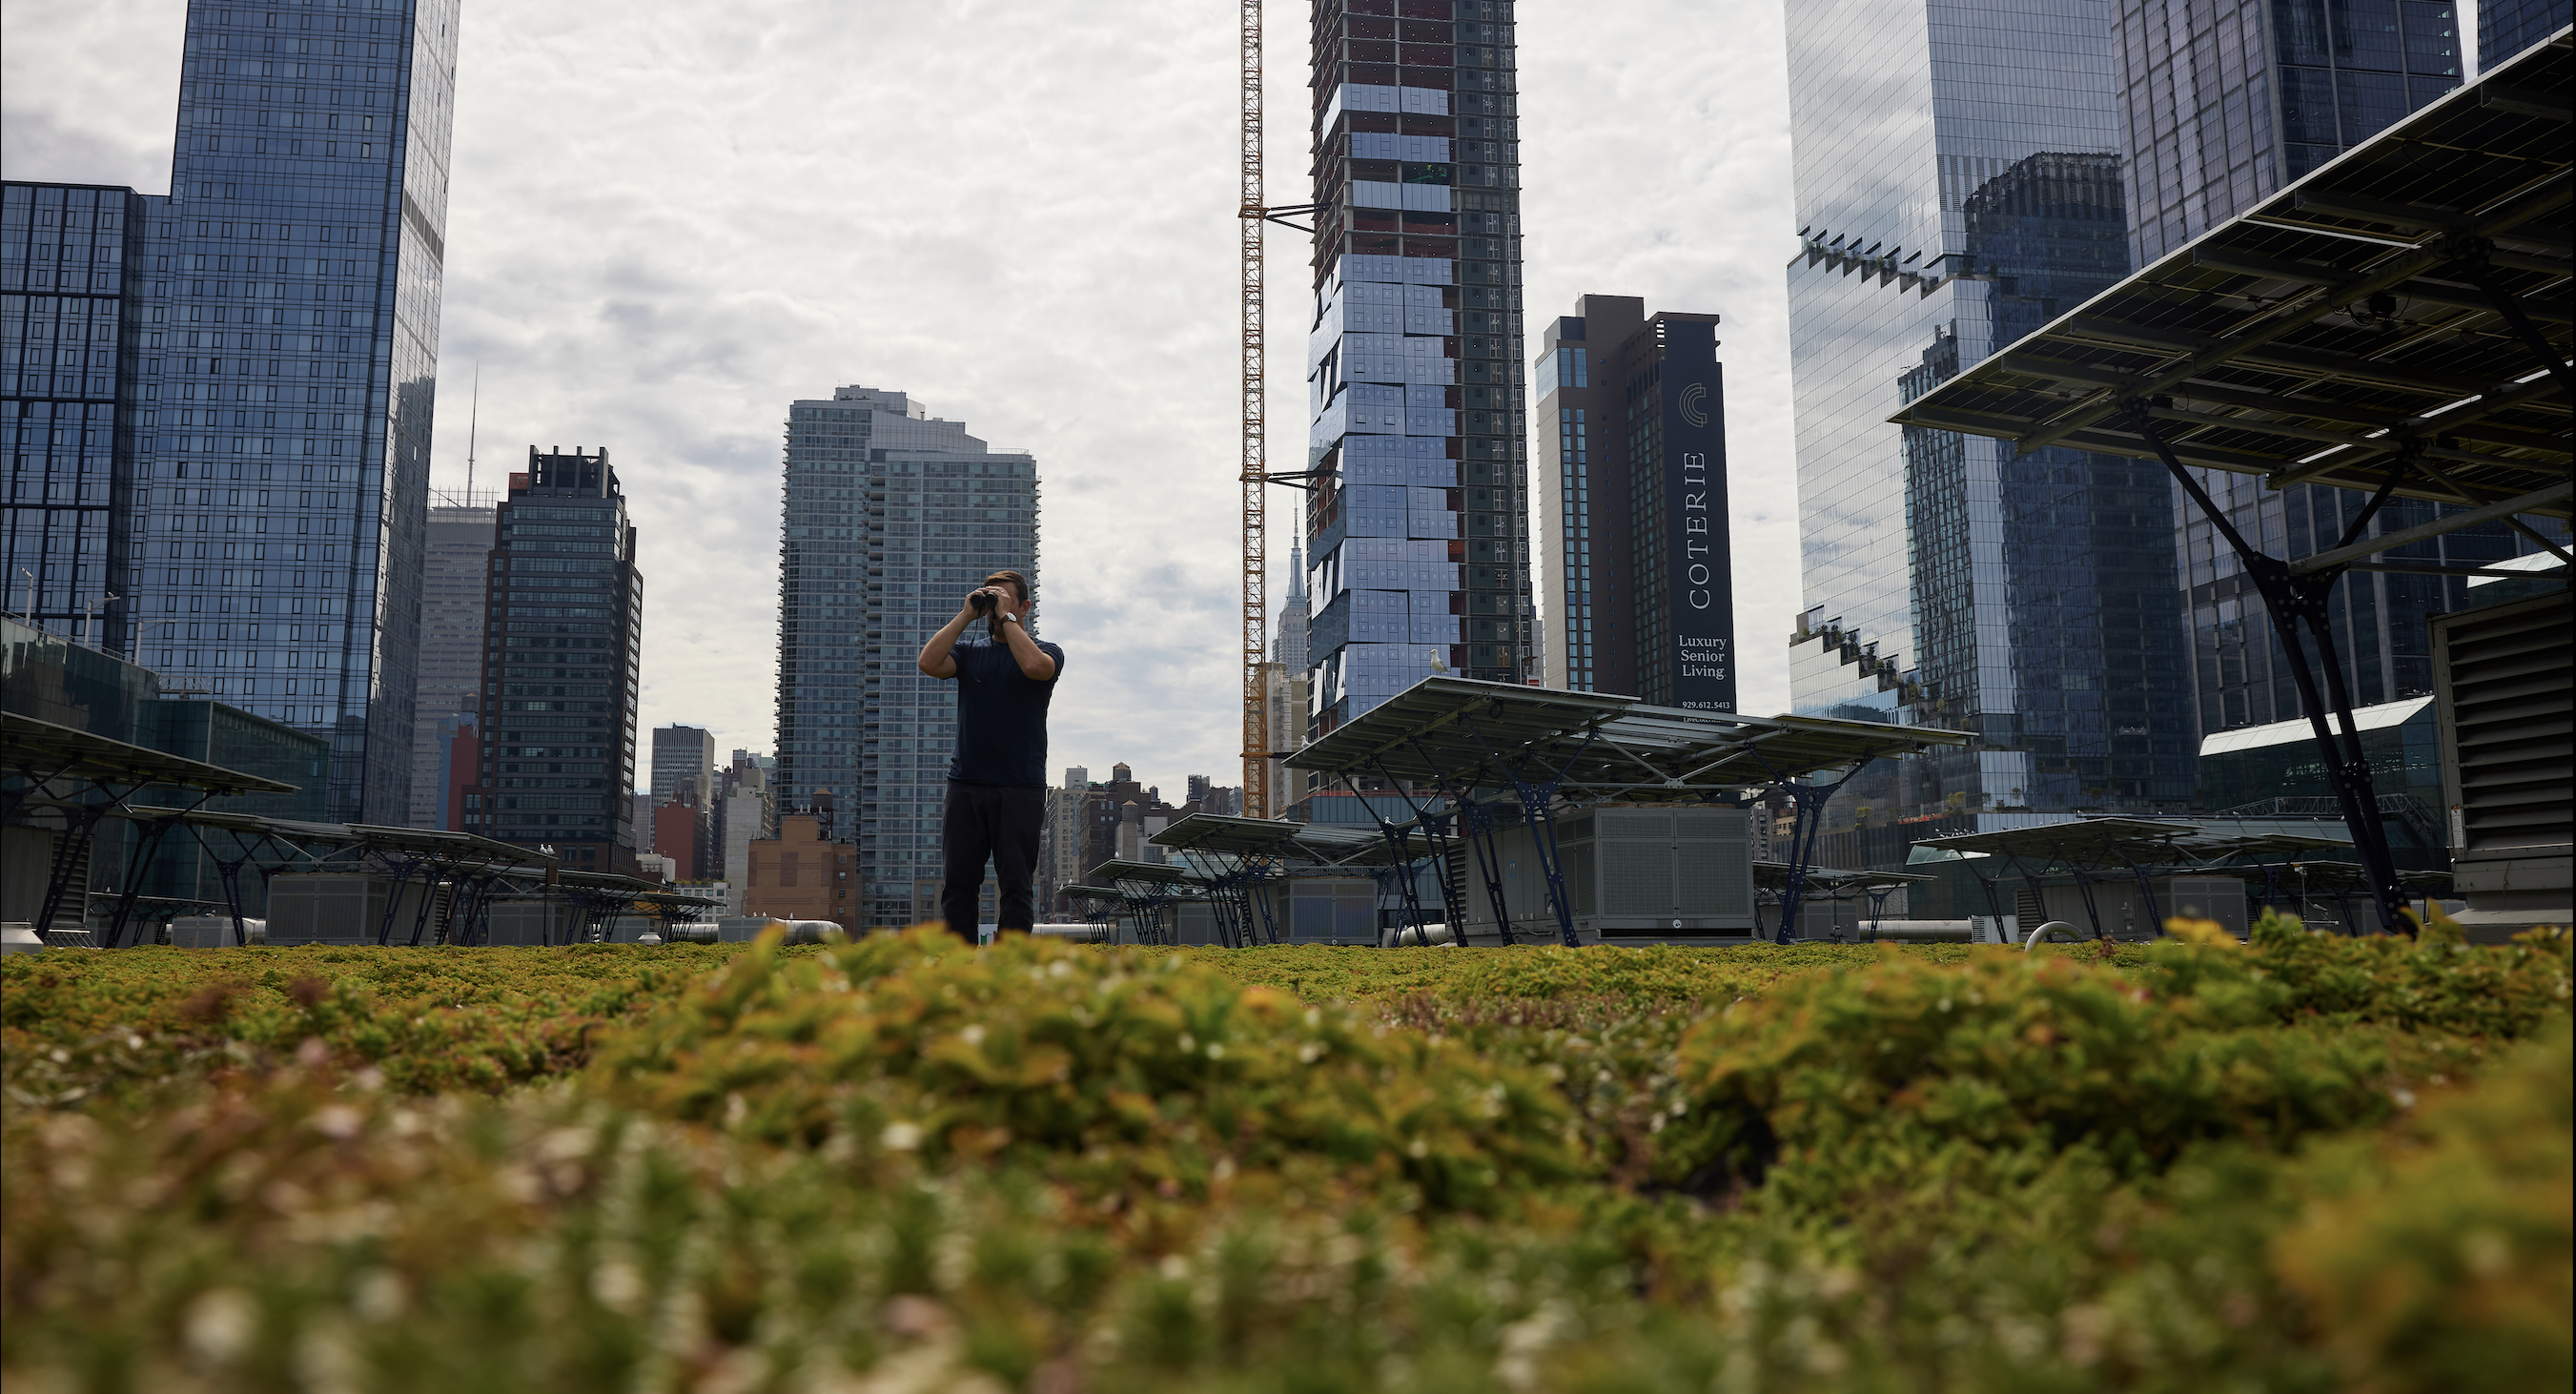 Dr. Dustin Partridge, Director of Conservation and Science, atop the Javits Green Roof. Photo by Argenis Apolinario.